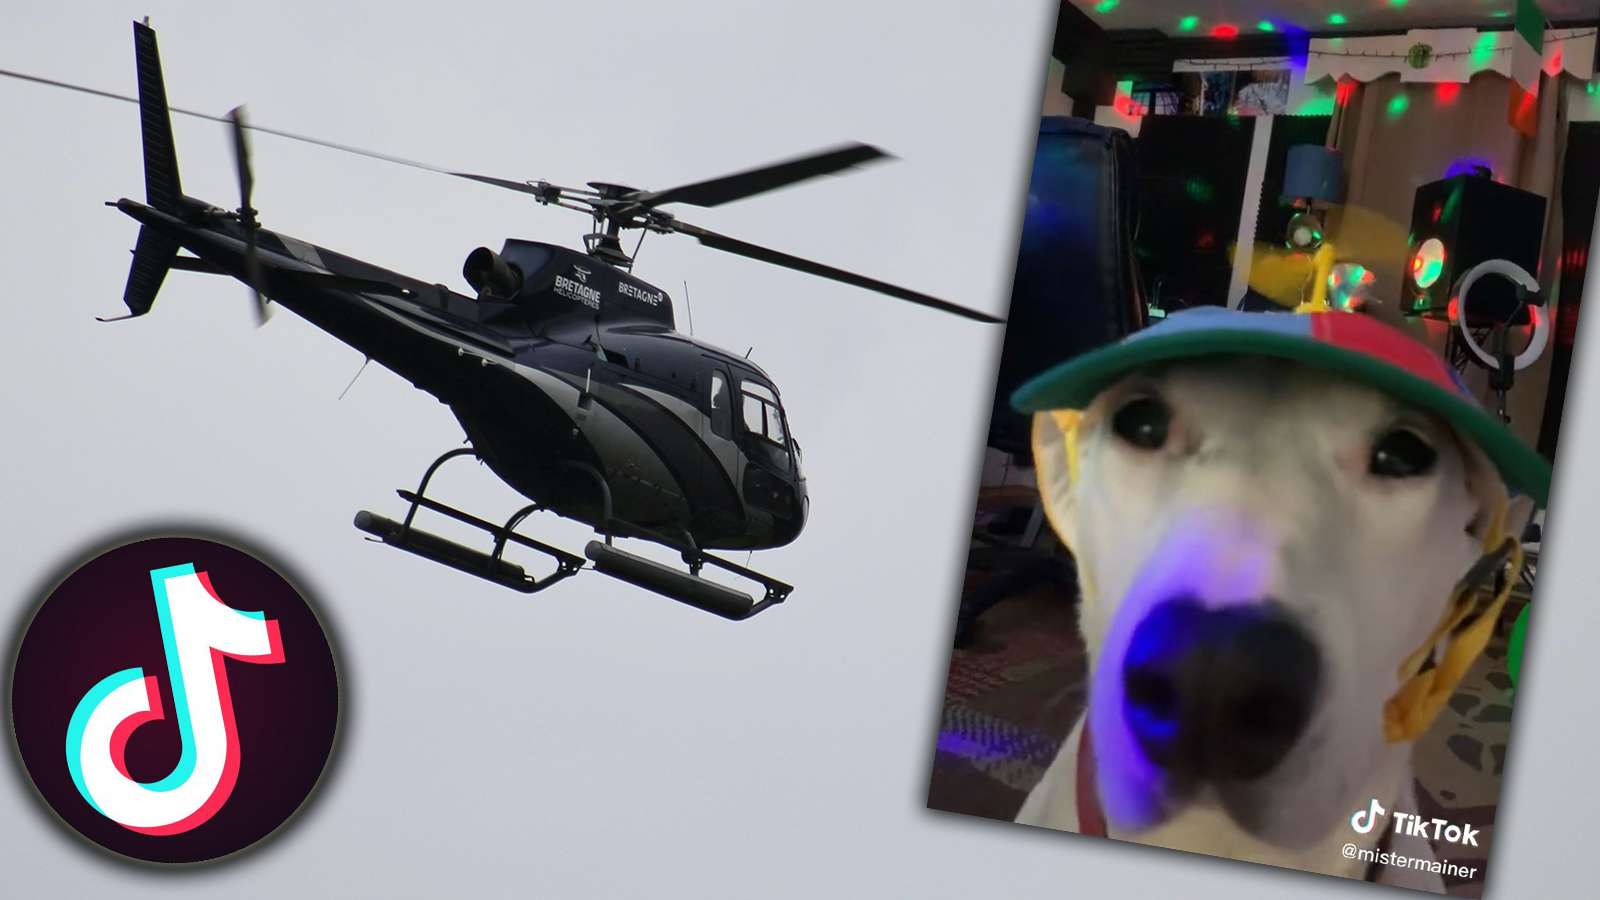 TikTok Helicopter Helicopter viral trend explained